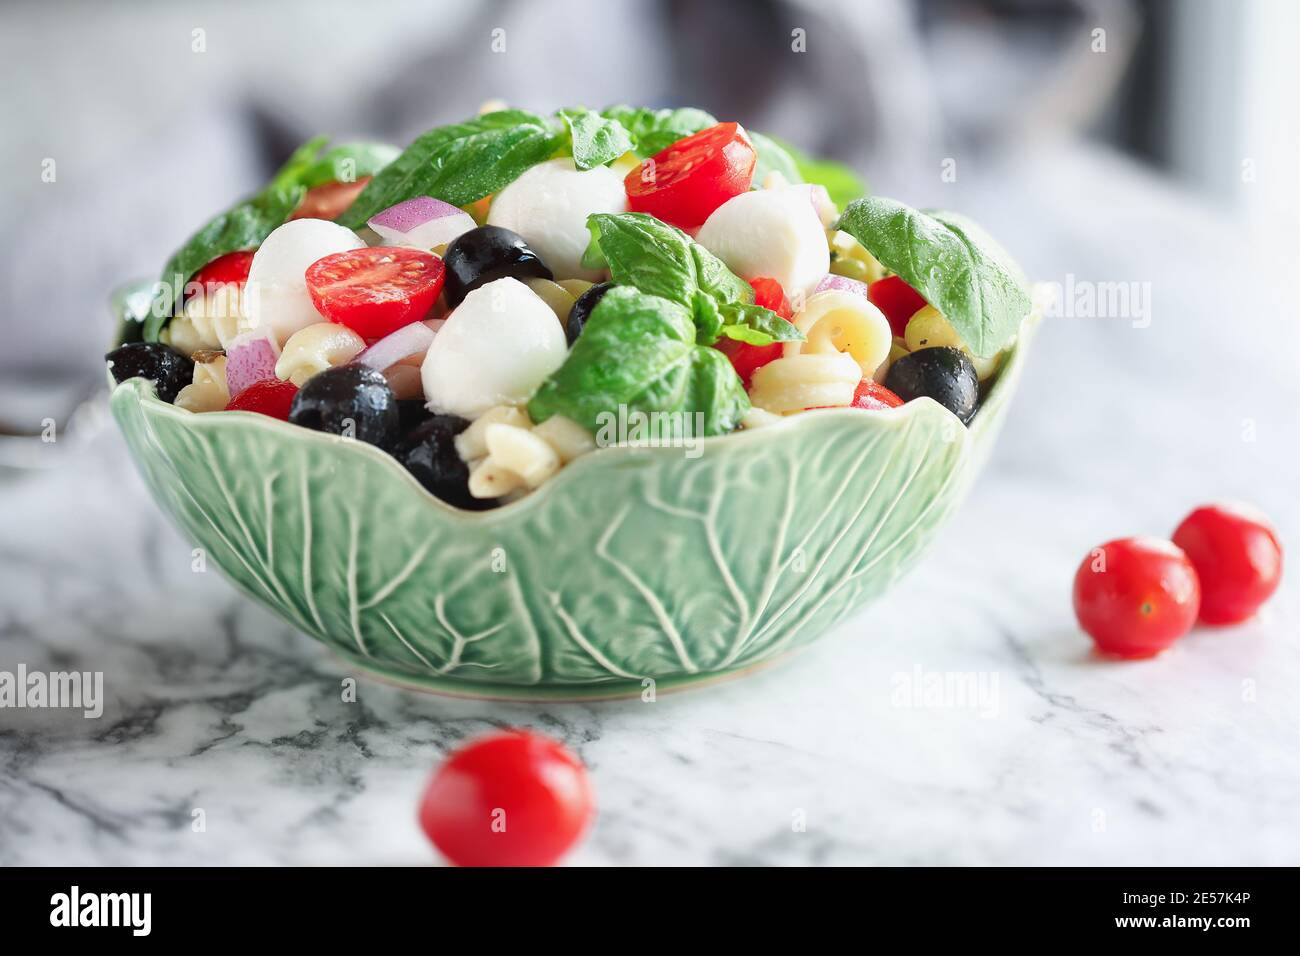 Italian pasta salad with fresh tomatoes, black olives, red onion mozzarella cheese balls, basil, and an olive oil dressing over marble table. Extreme Stock Photo